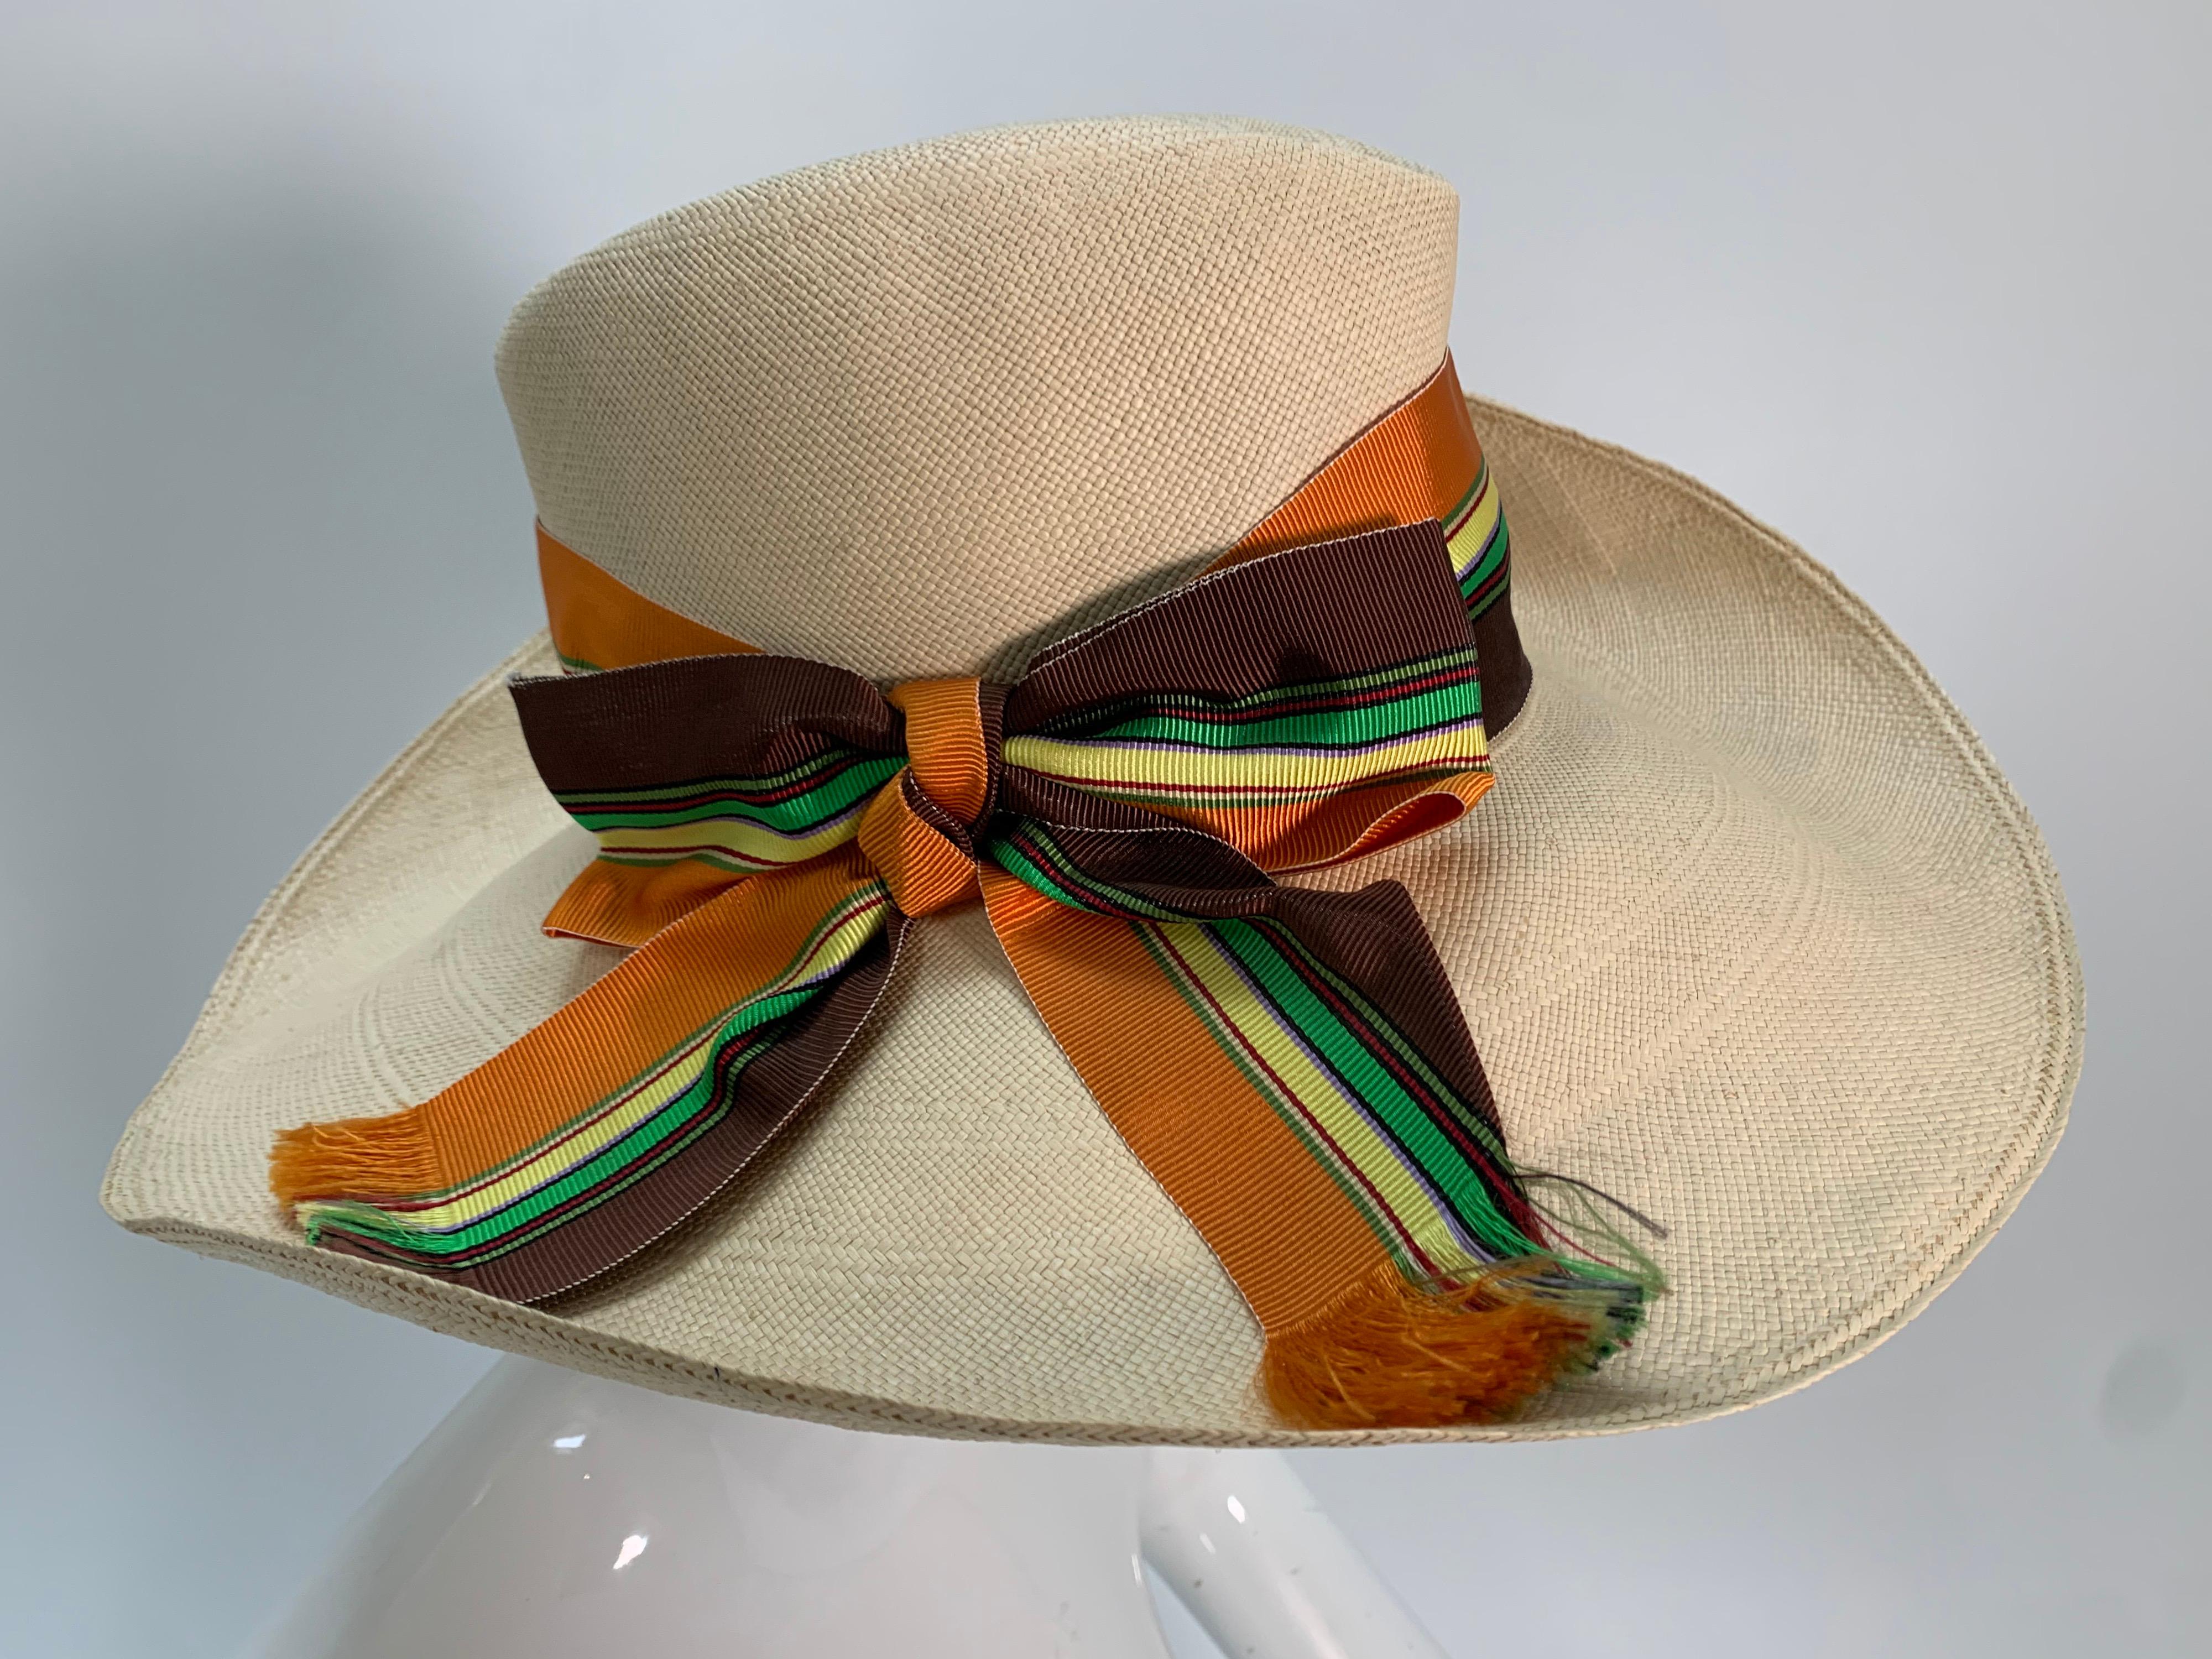 A stylish 1960s Frank Olive natural straw wide-brimmed sun hat with green and brown striped grosgrain ribbon band with a graceful curve to the brim. Squared, tall crown and pink inner grosgrain band. Fits up to medium. 